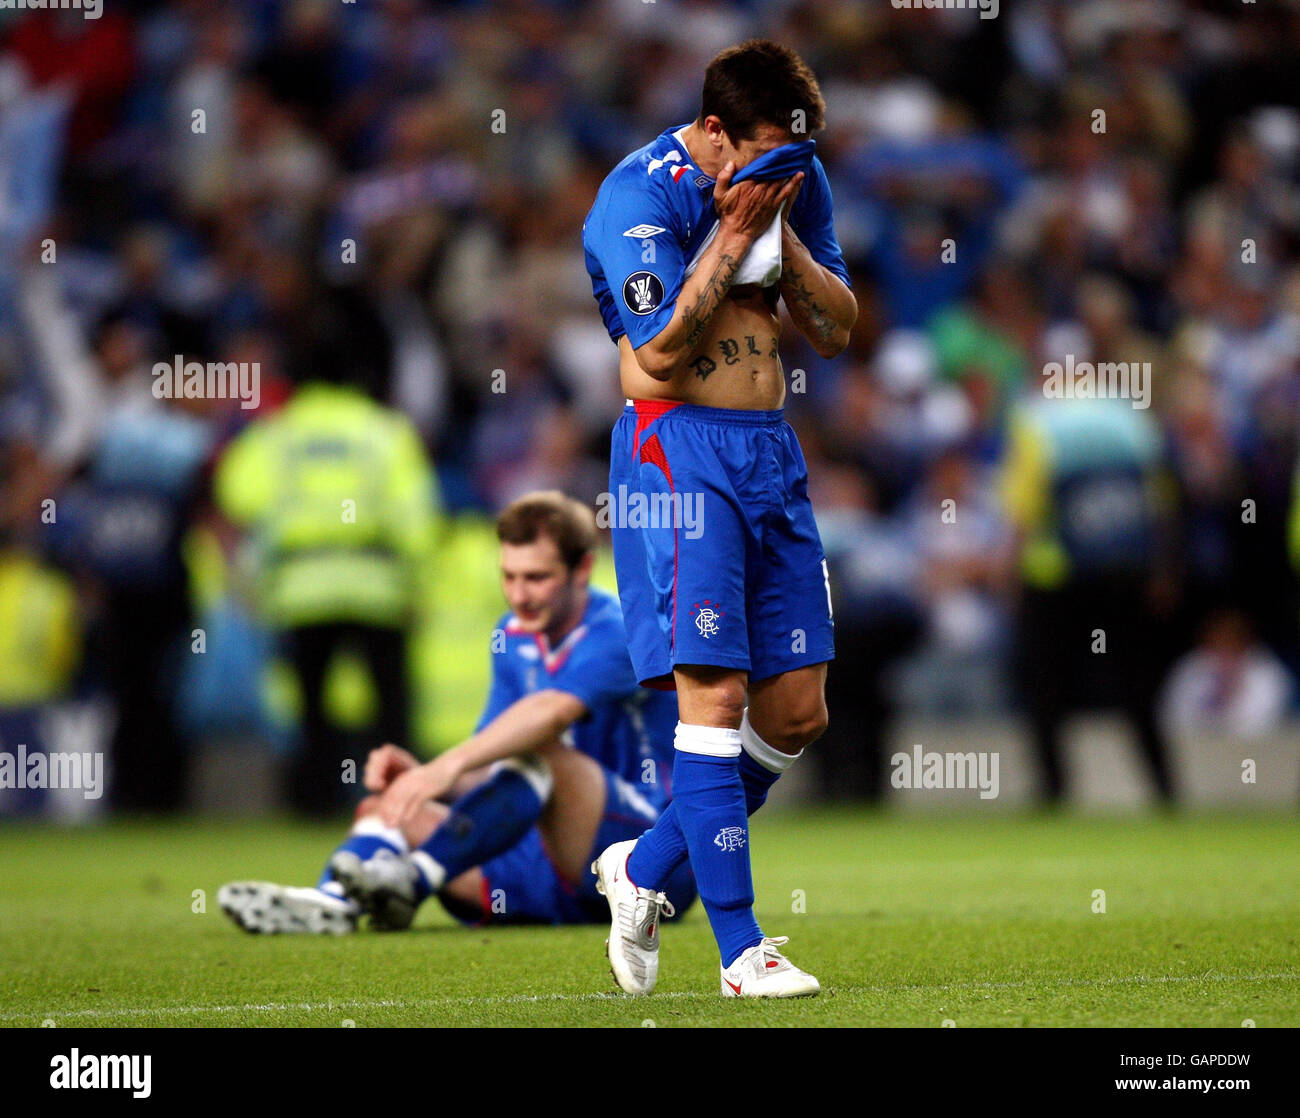 Soccer - UEFA Cup - Final - FC Zenit Saint Petersburg v Rangers - City Of Manchester Stadium. Dejected Nacho Novo at the final whistle in the UEFA Cup Final at City of Manchester Stadium, Manchester. Stock Photo